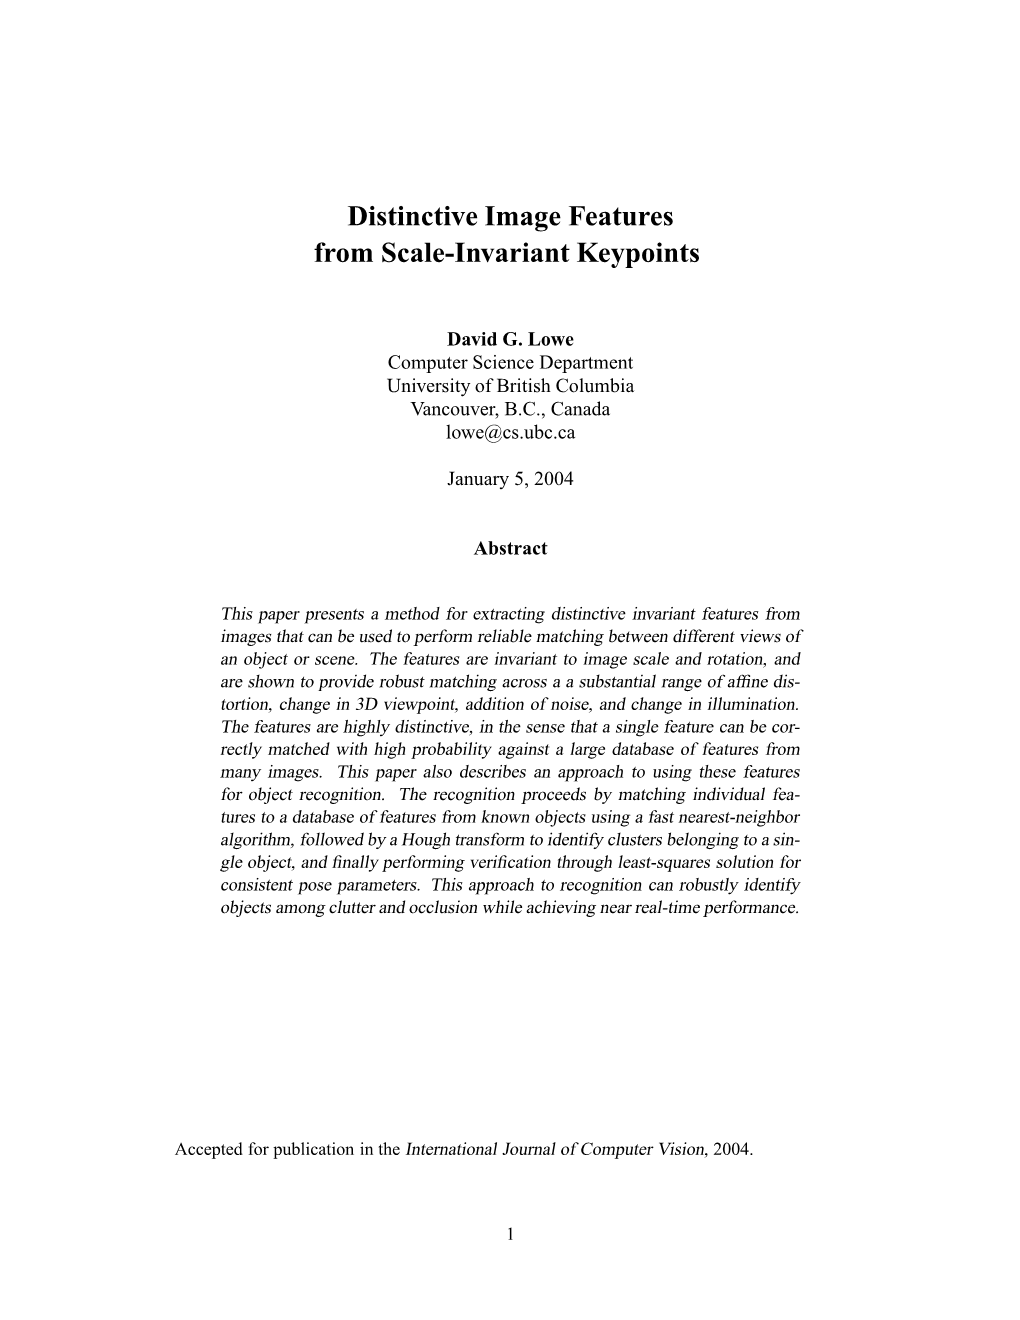 David Lowe, Distinctive Image Features from Scale-Invariant